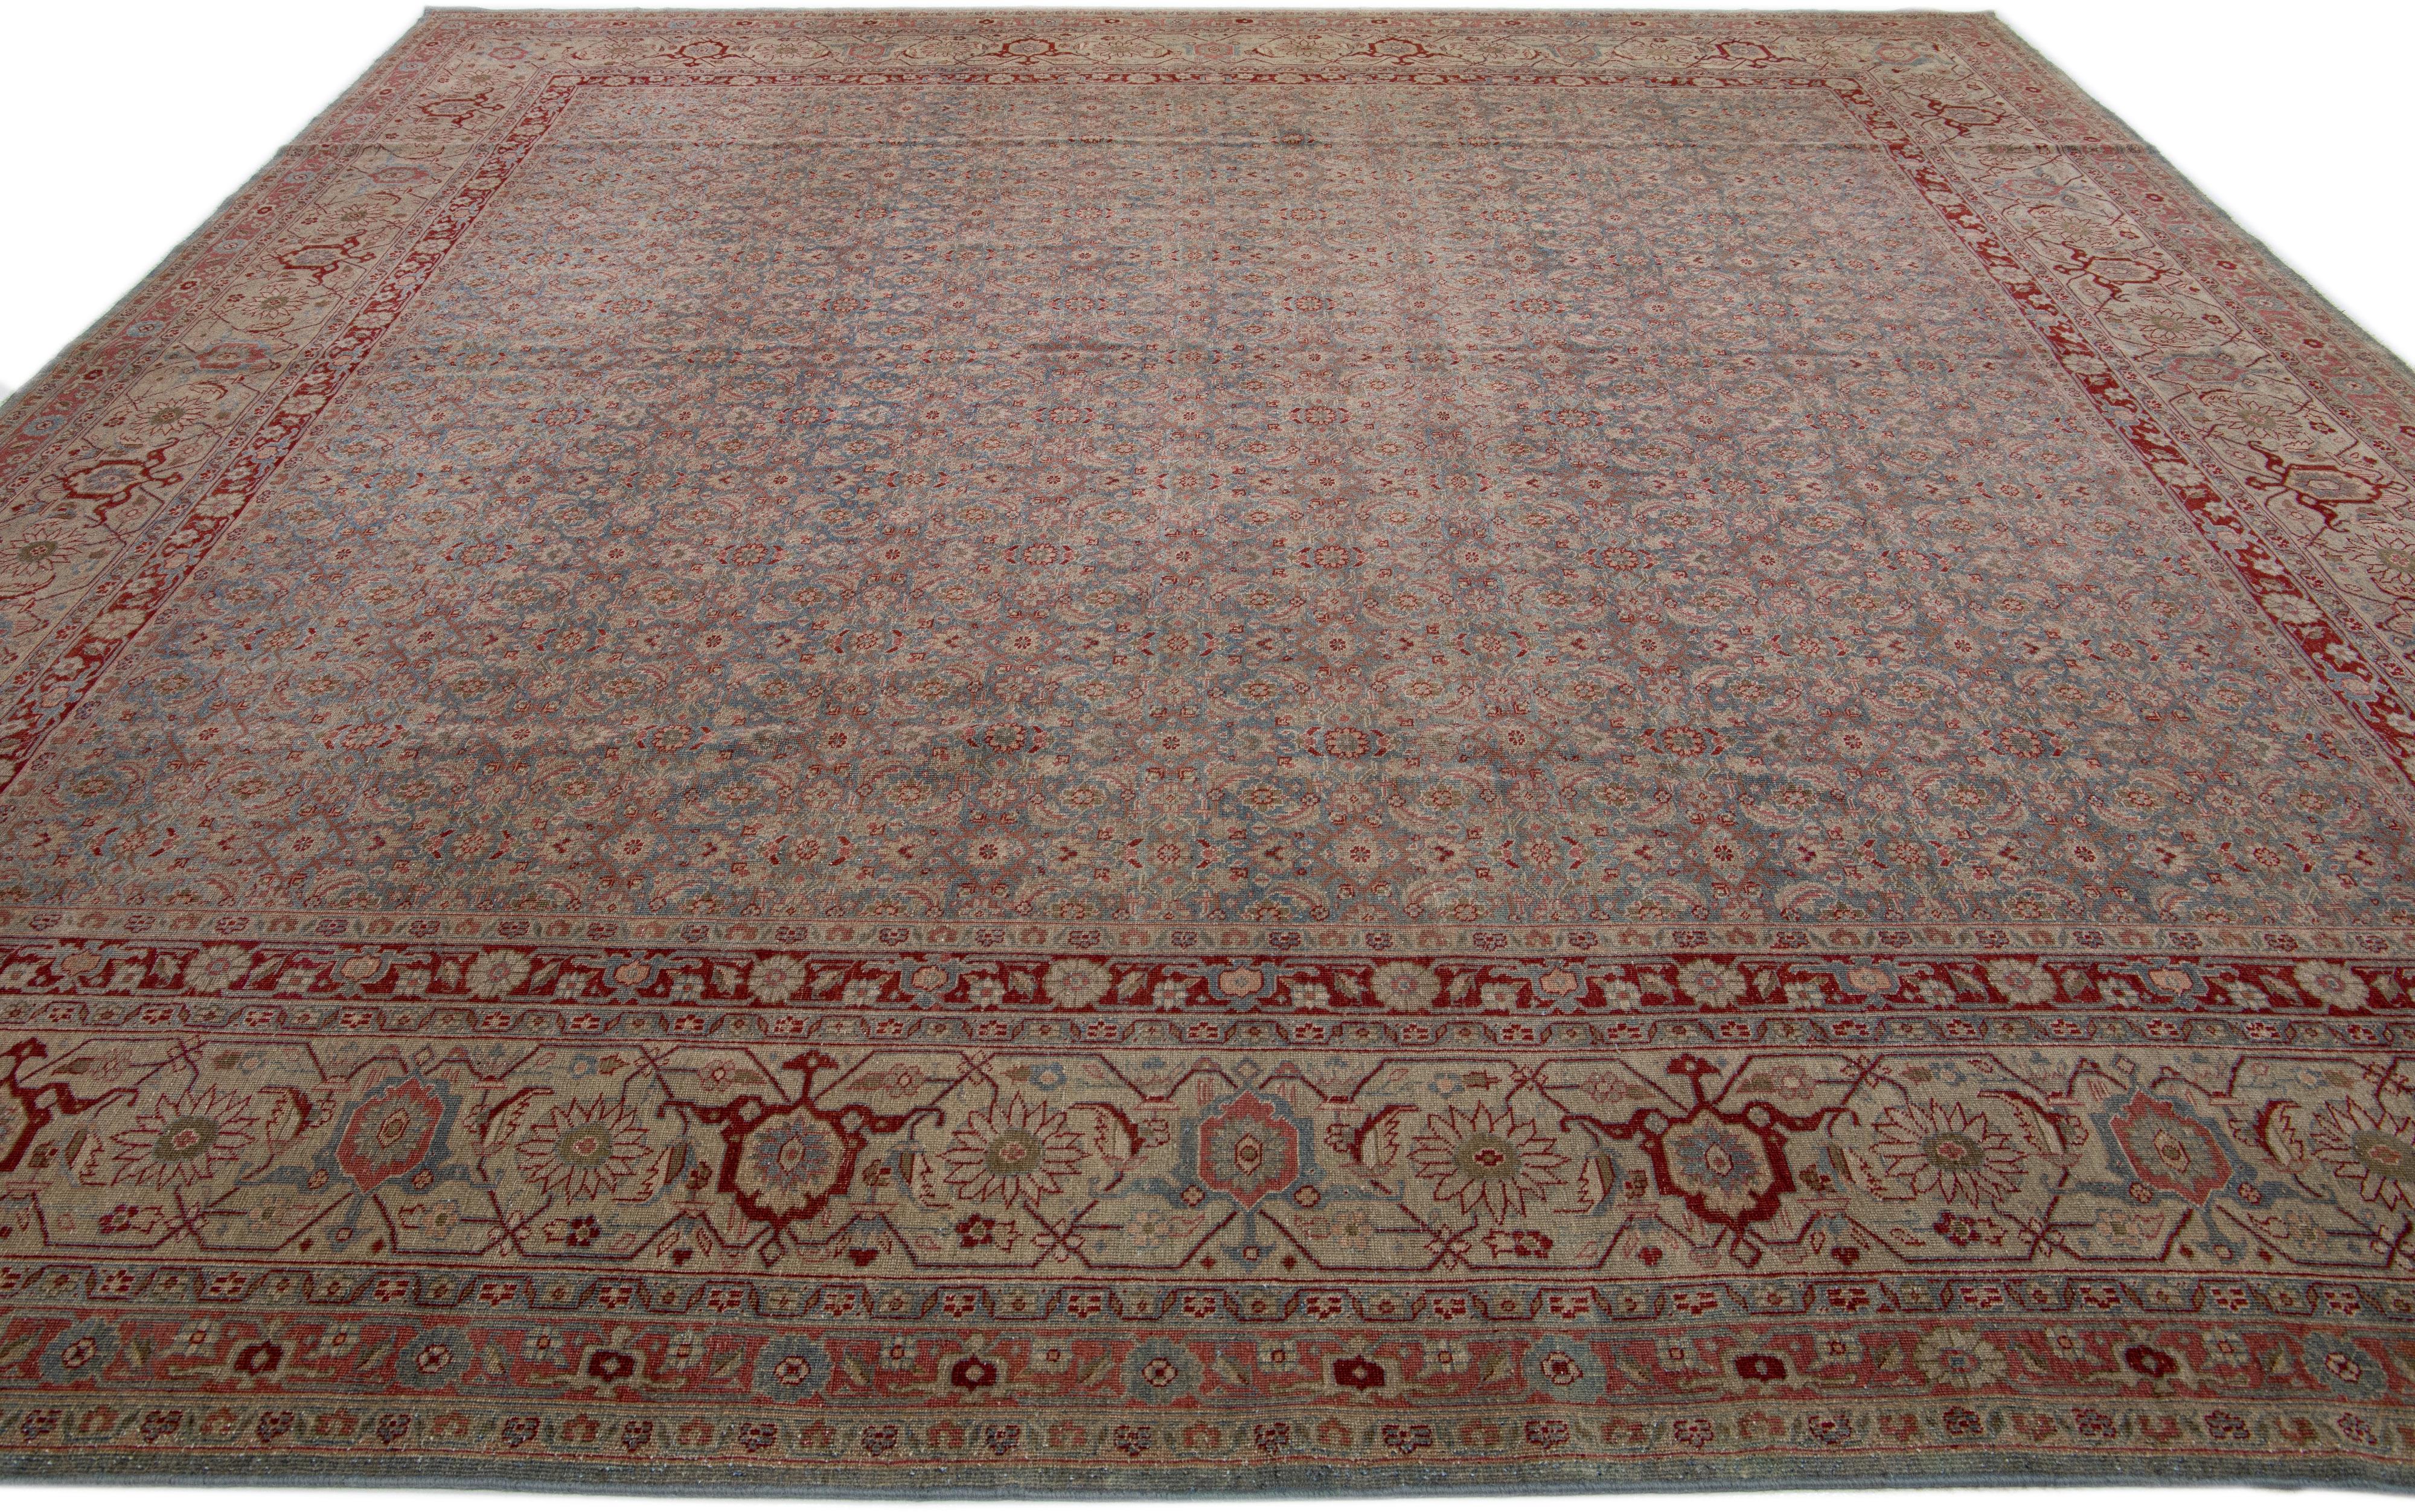 1900s Allover Persian Tabriz Square Wool Rug Handmade in Blue and Red In Good Condition For Sale In Norwalk, CT